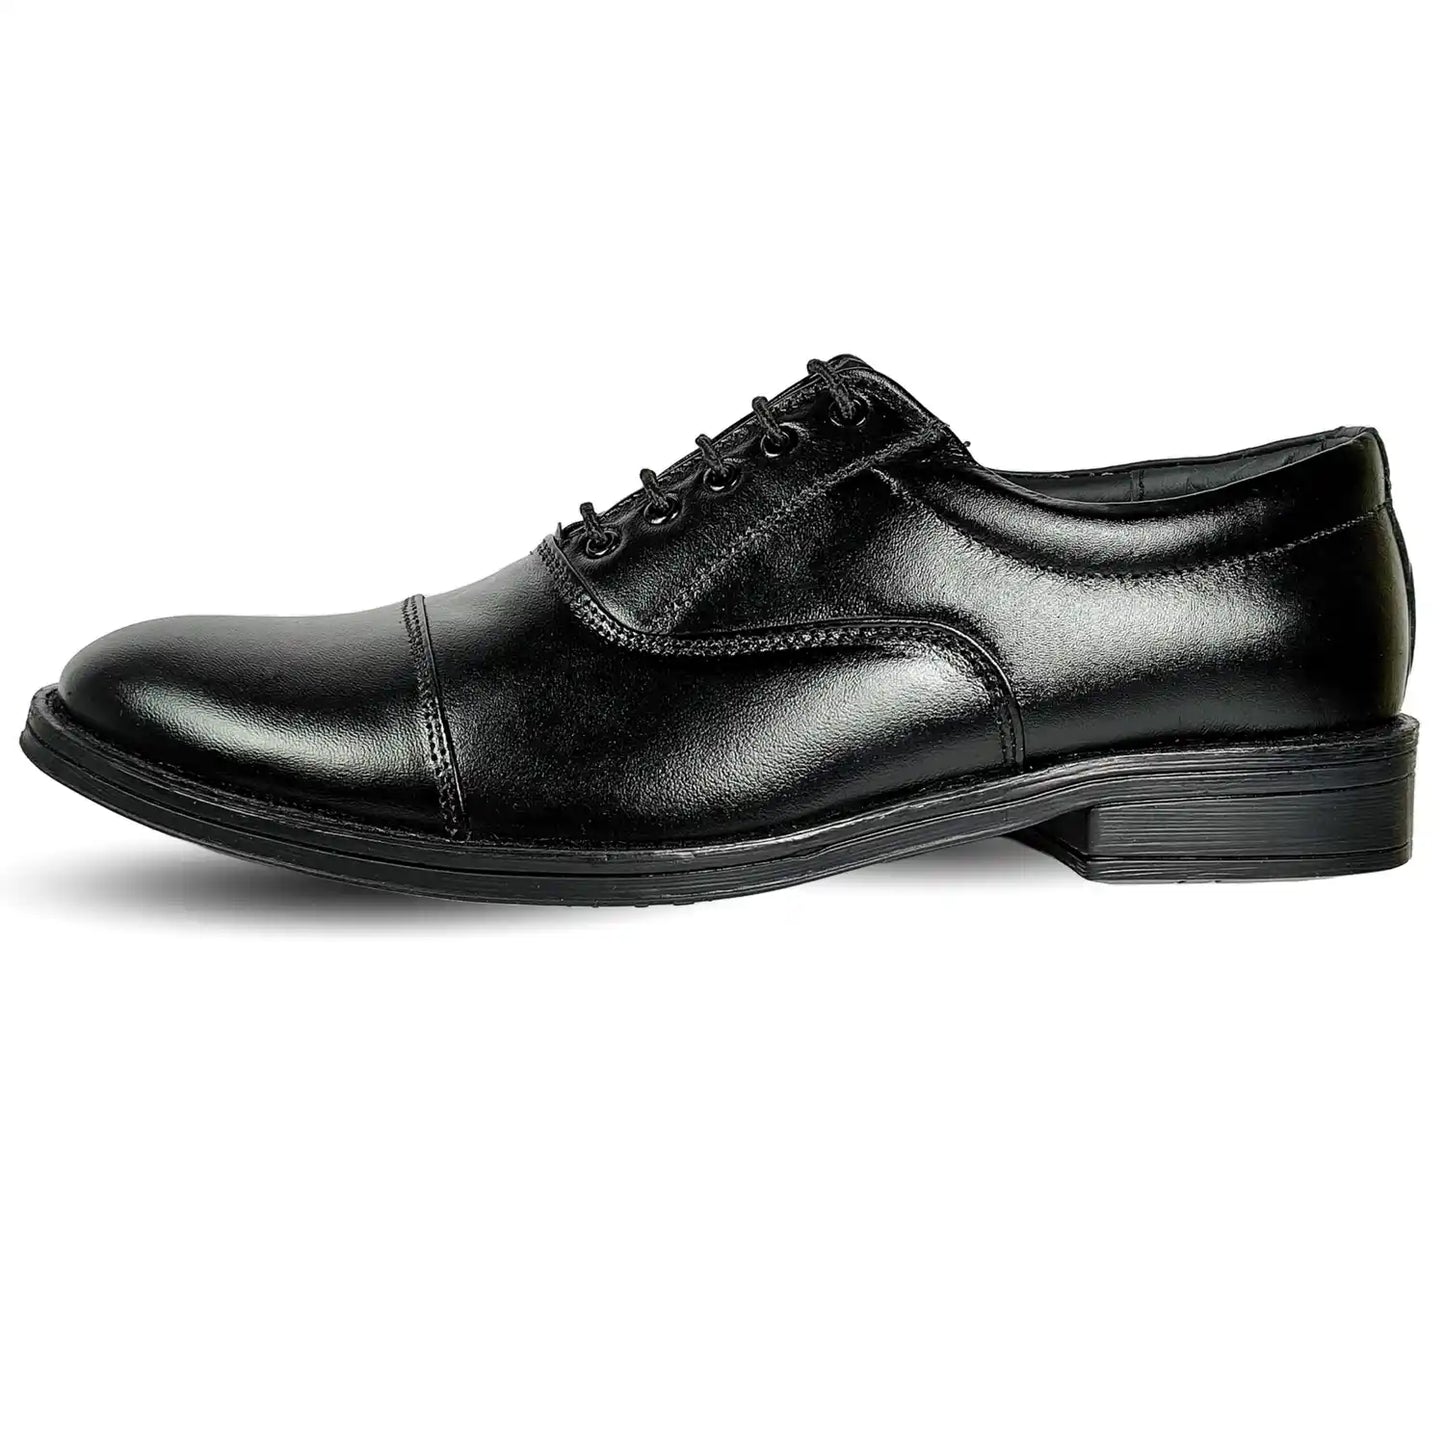 Police Dress Shoes Pure Leather Oxford for Men